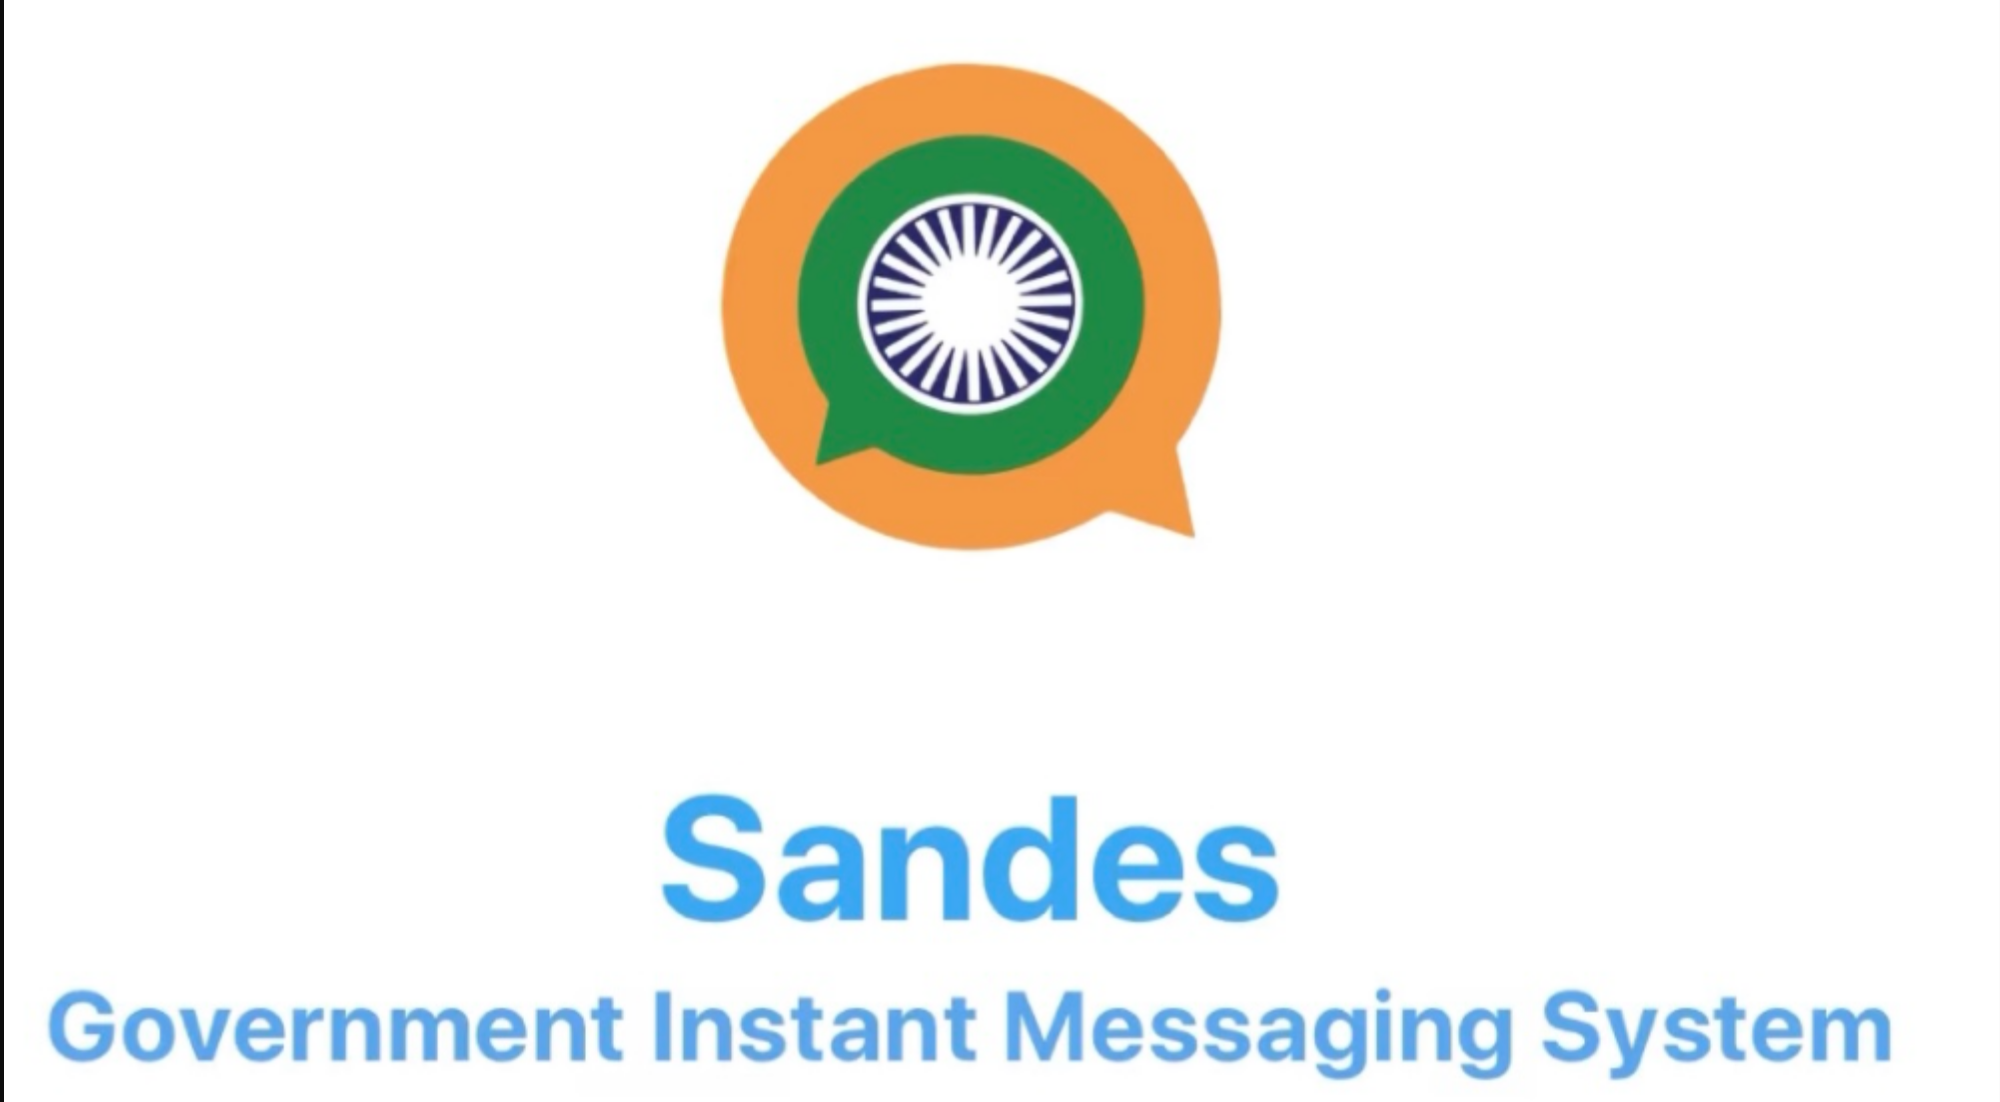 Indian Government launched SANDES: Alternate to Whatsapp